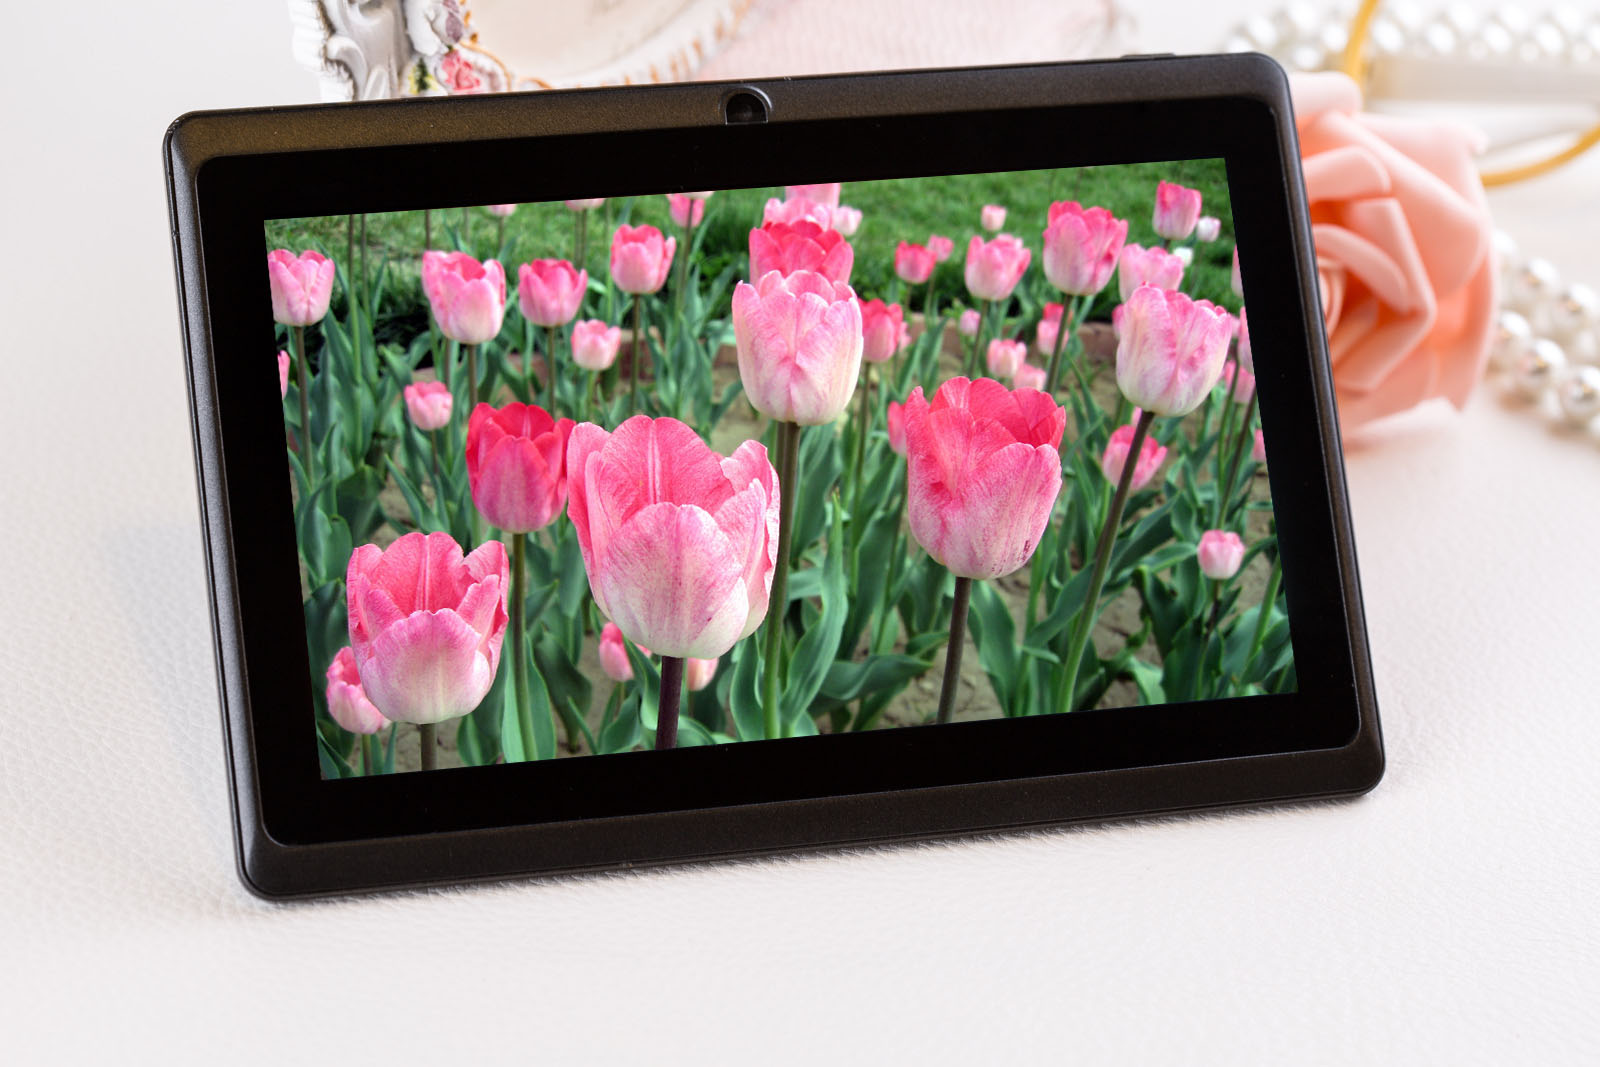 742A-7 Inch Colorful Tablet PC with WiFi (Allwinner A13 Q88)